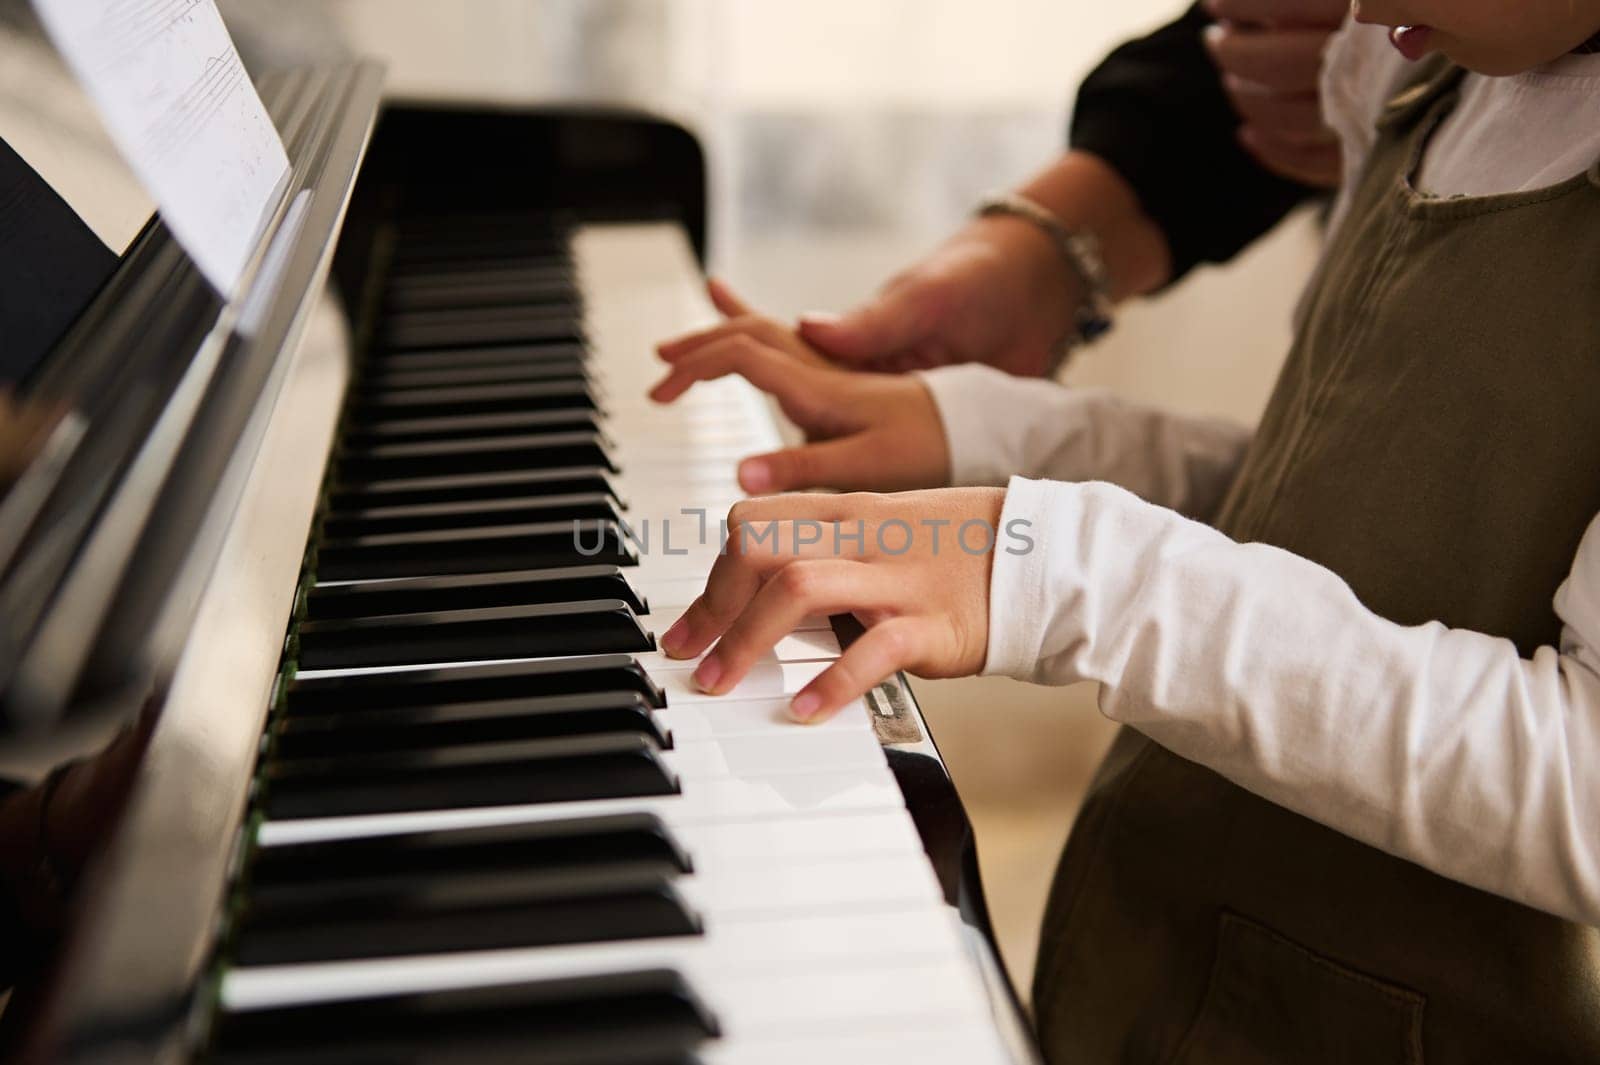 Side view of child's hands on piano keyboard, touching white and black keys while playing music on grand piano by artgf